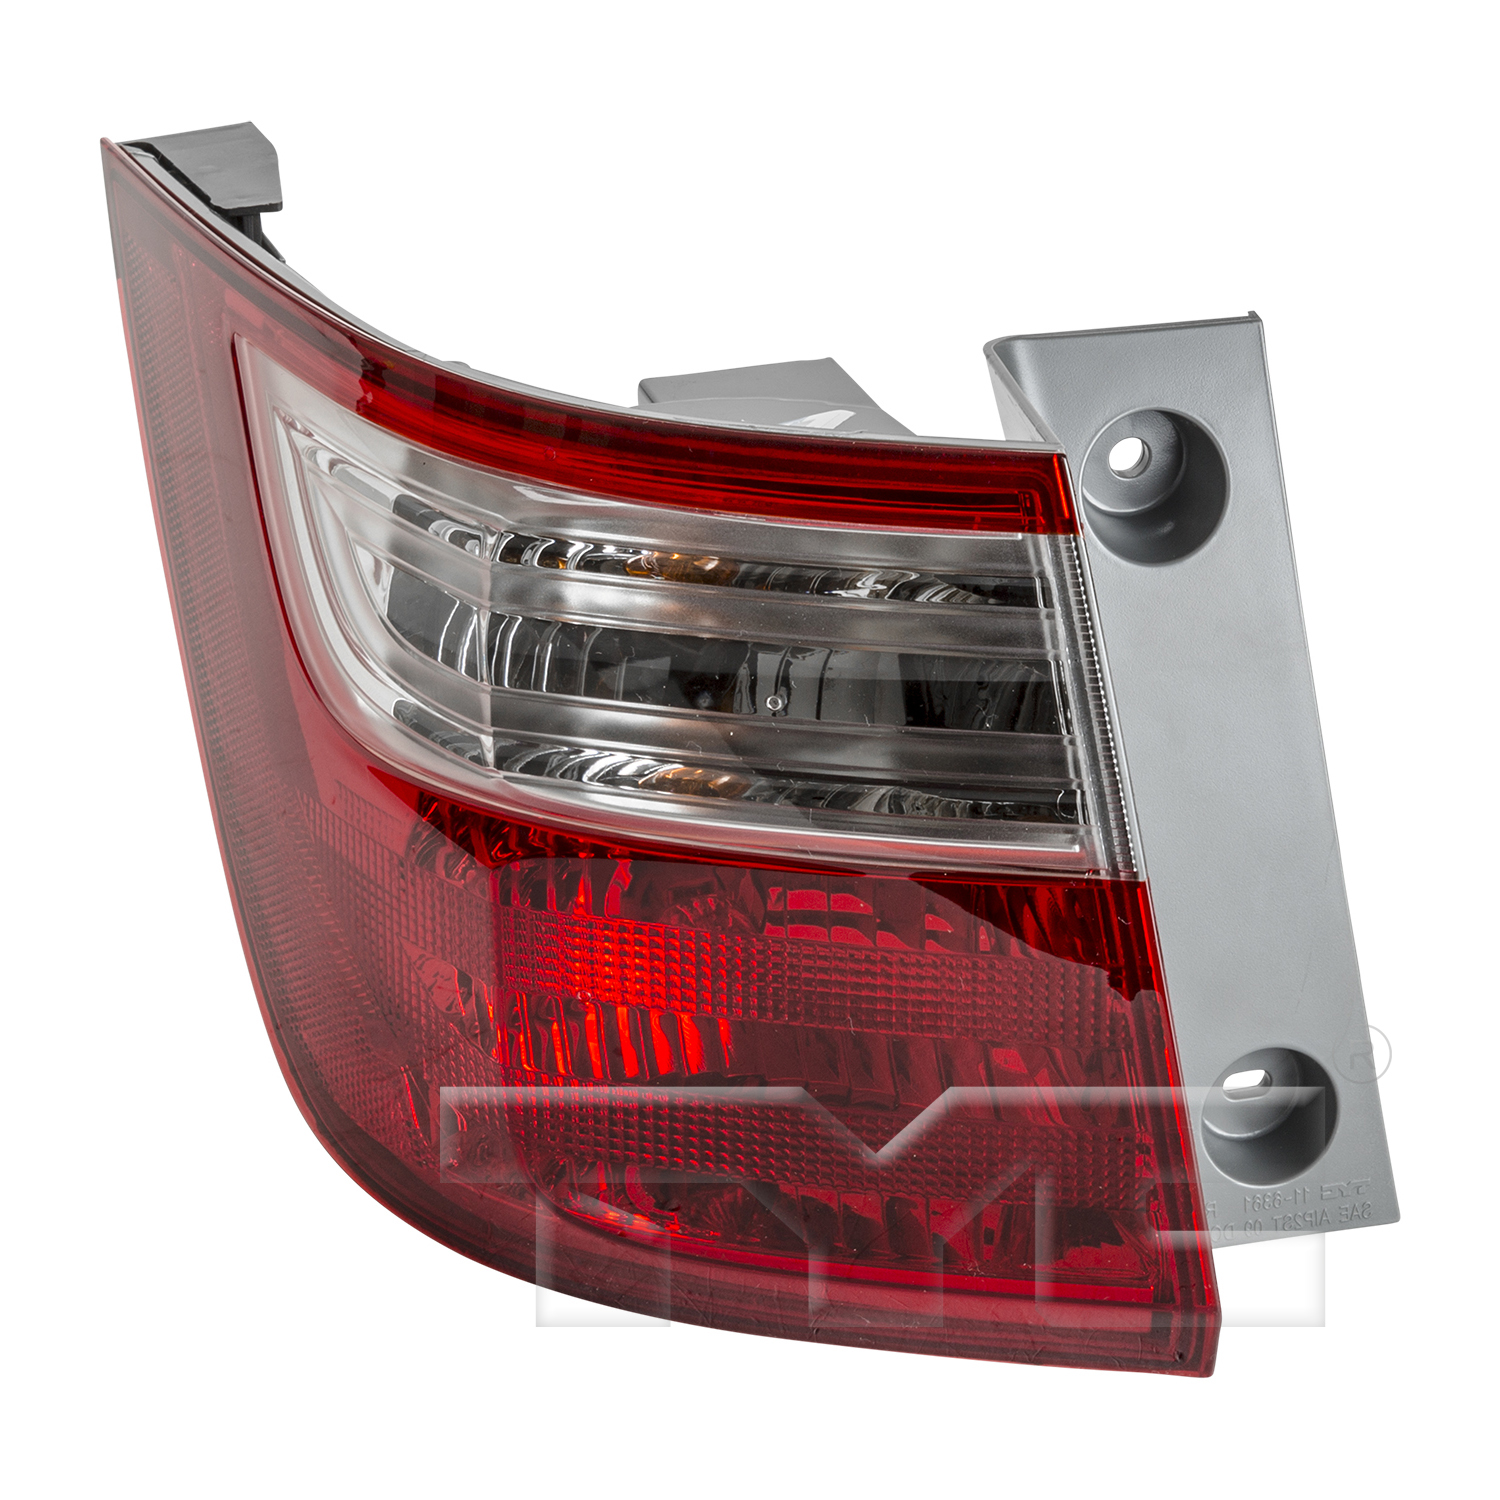 Aftermarket TAILLIGHTS for HONDA - ODYSSEY, ODYSSEY,11-13,LT Taillamp assy outer